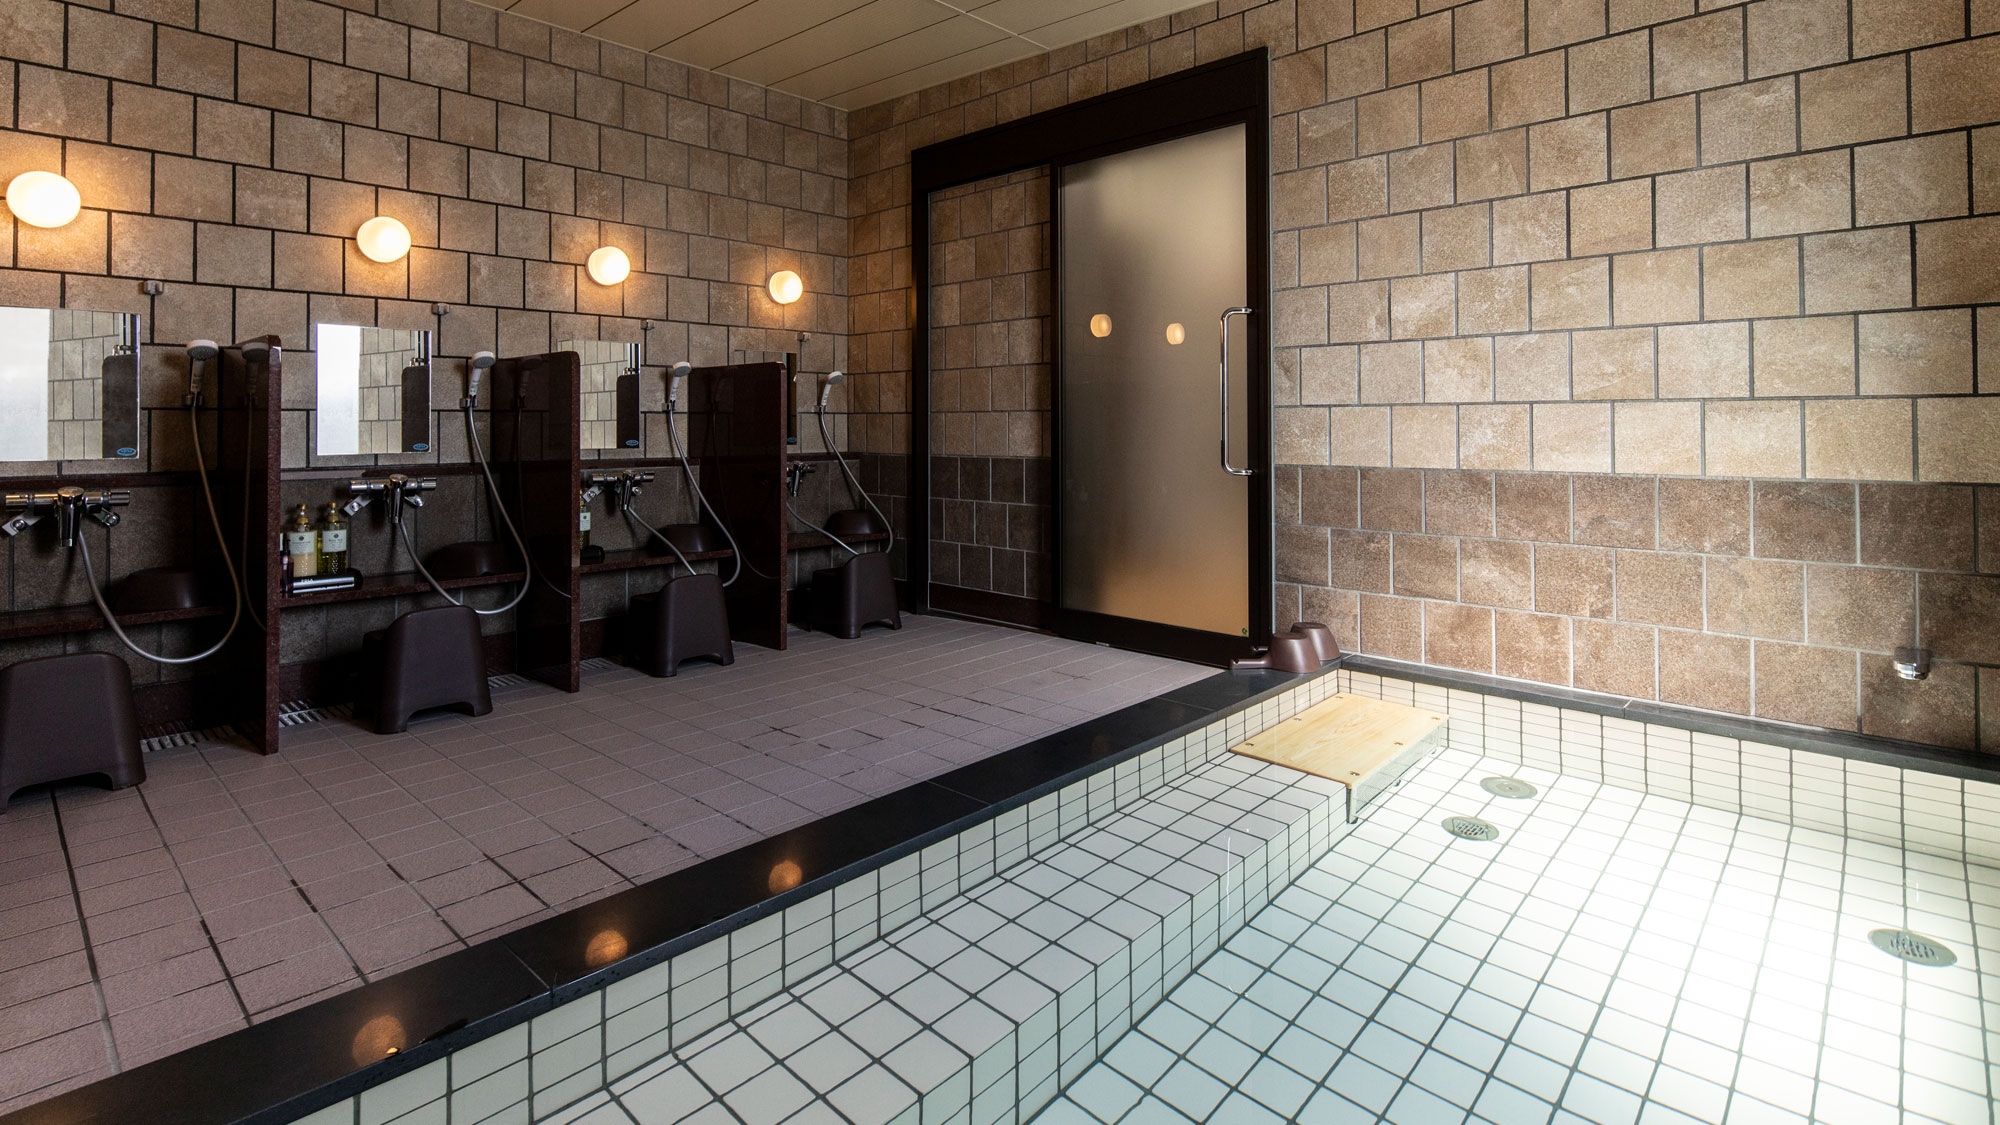 There is also a separate bath for men and women on the 1st floor!